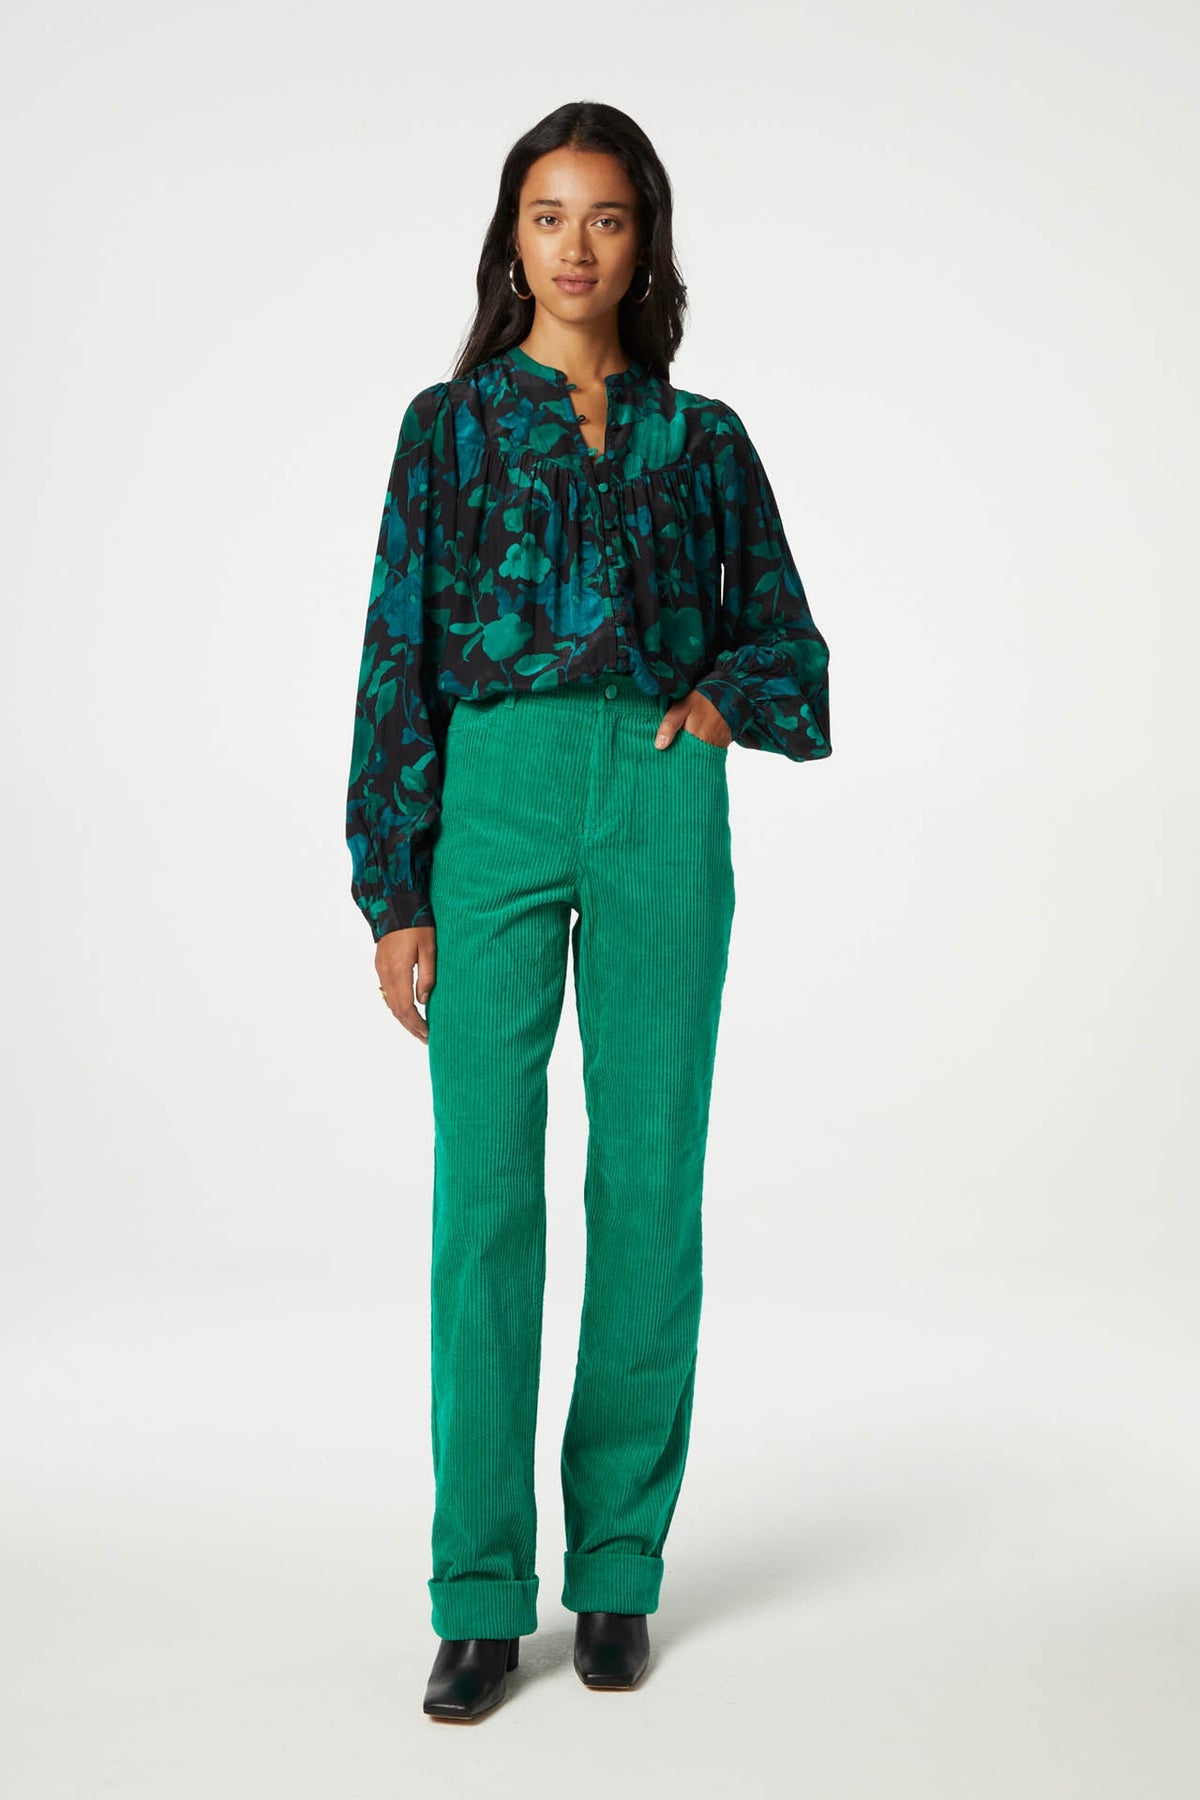 Straight cut vibrant green jumbo cord trousers with a turn up at the hem